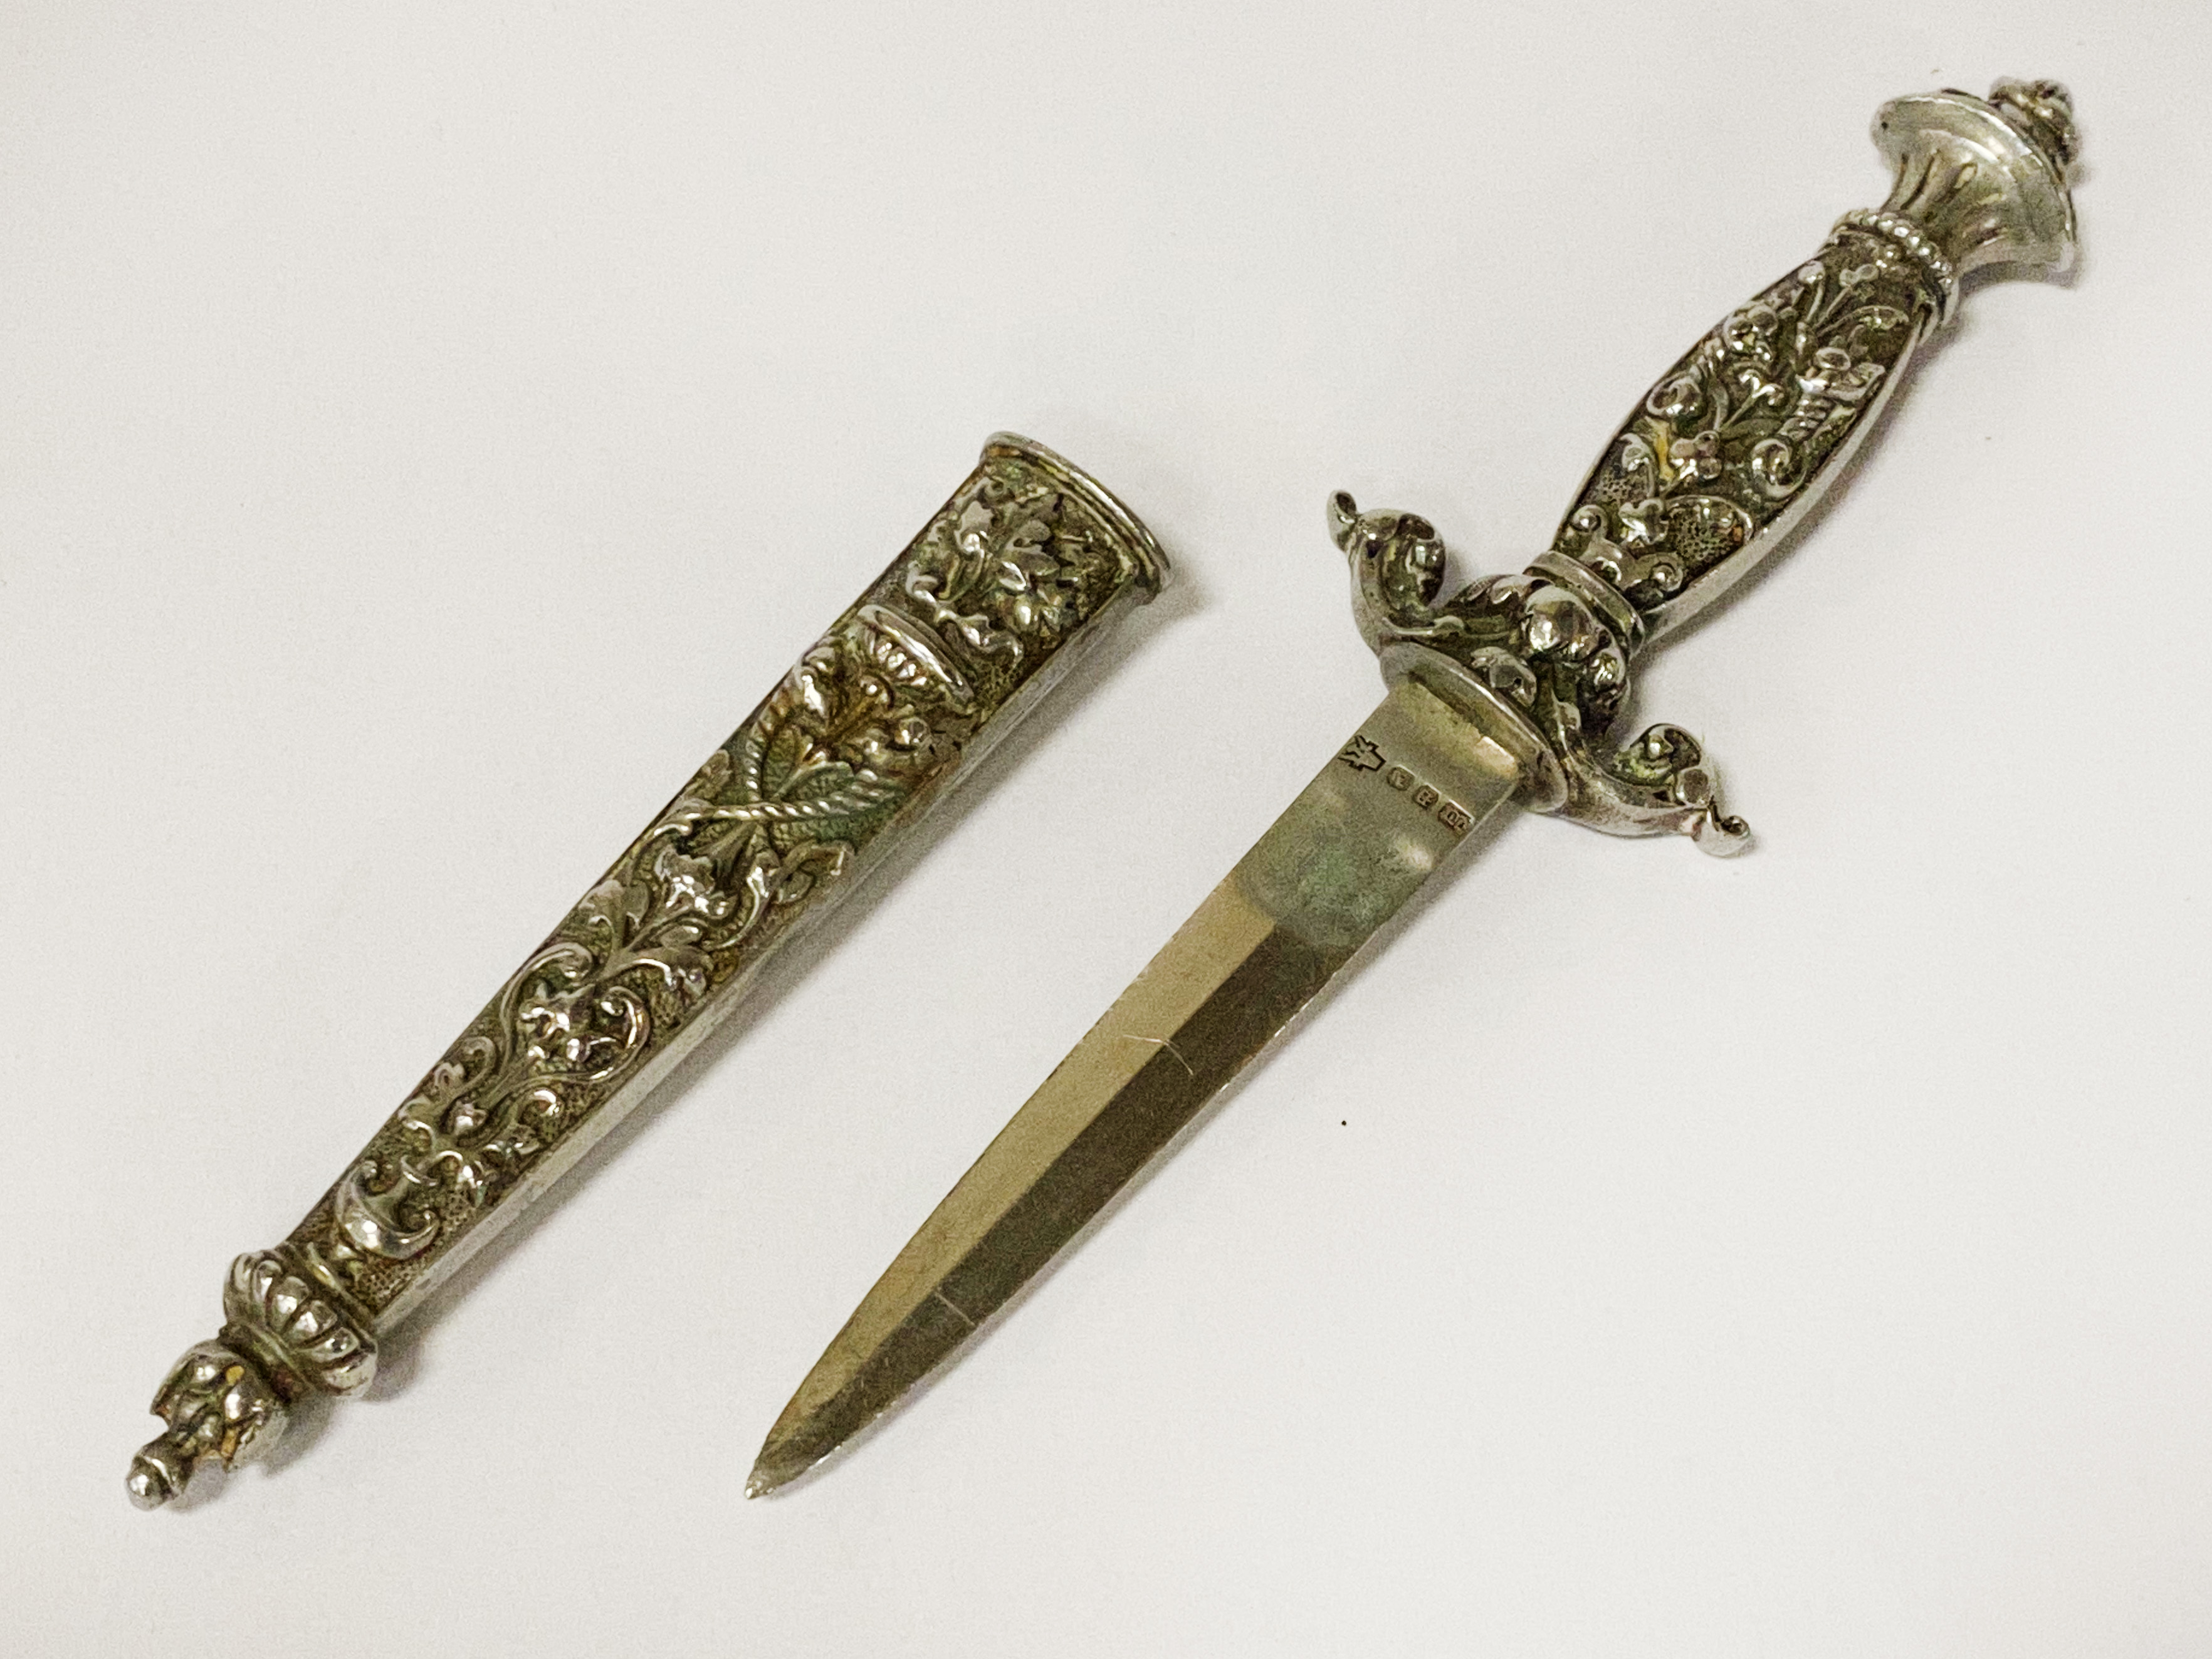 ORNATE EARLY DAGGER/LETTER OPENER WITH SCABBARD